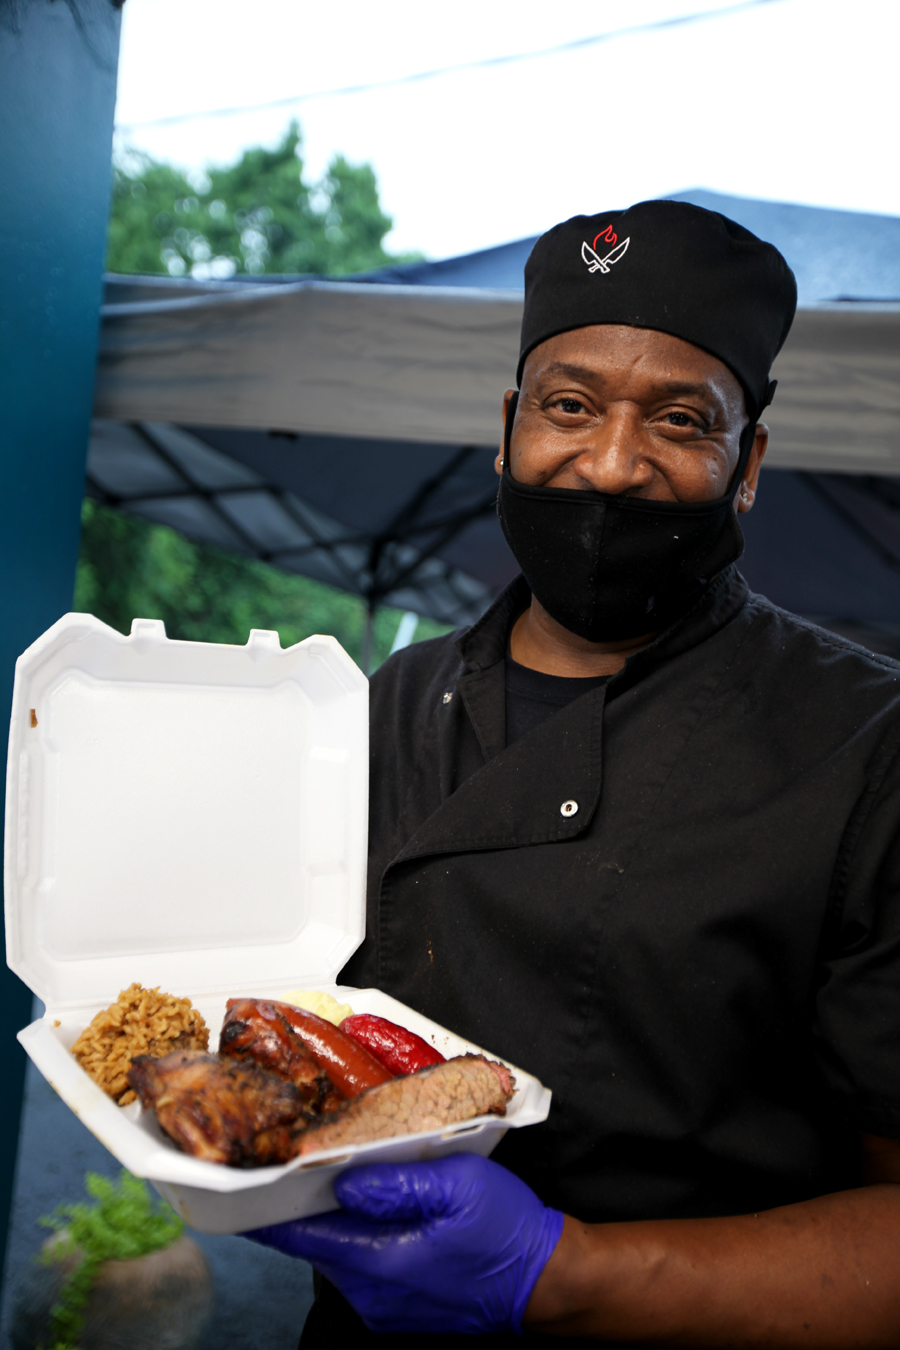 A photo of a man holding a tray of barbecue